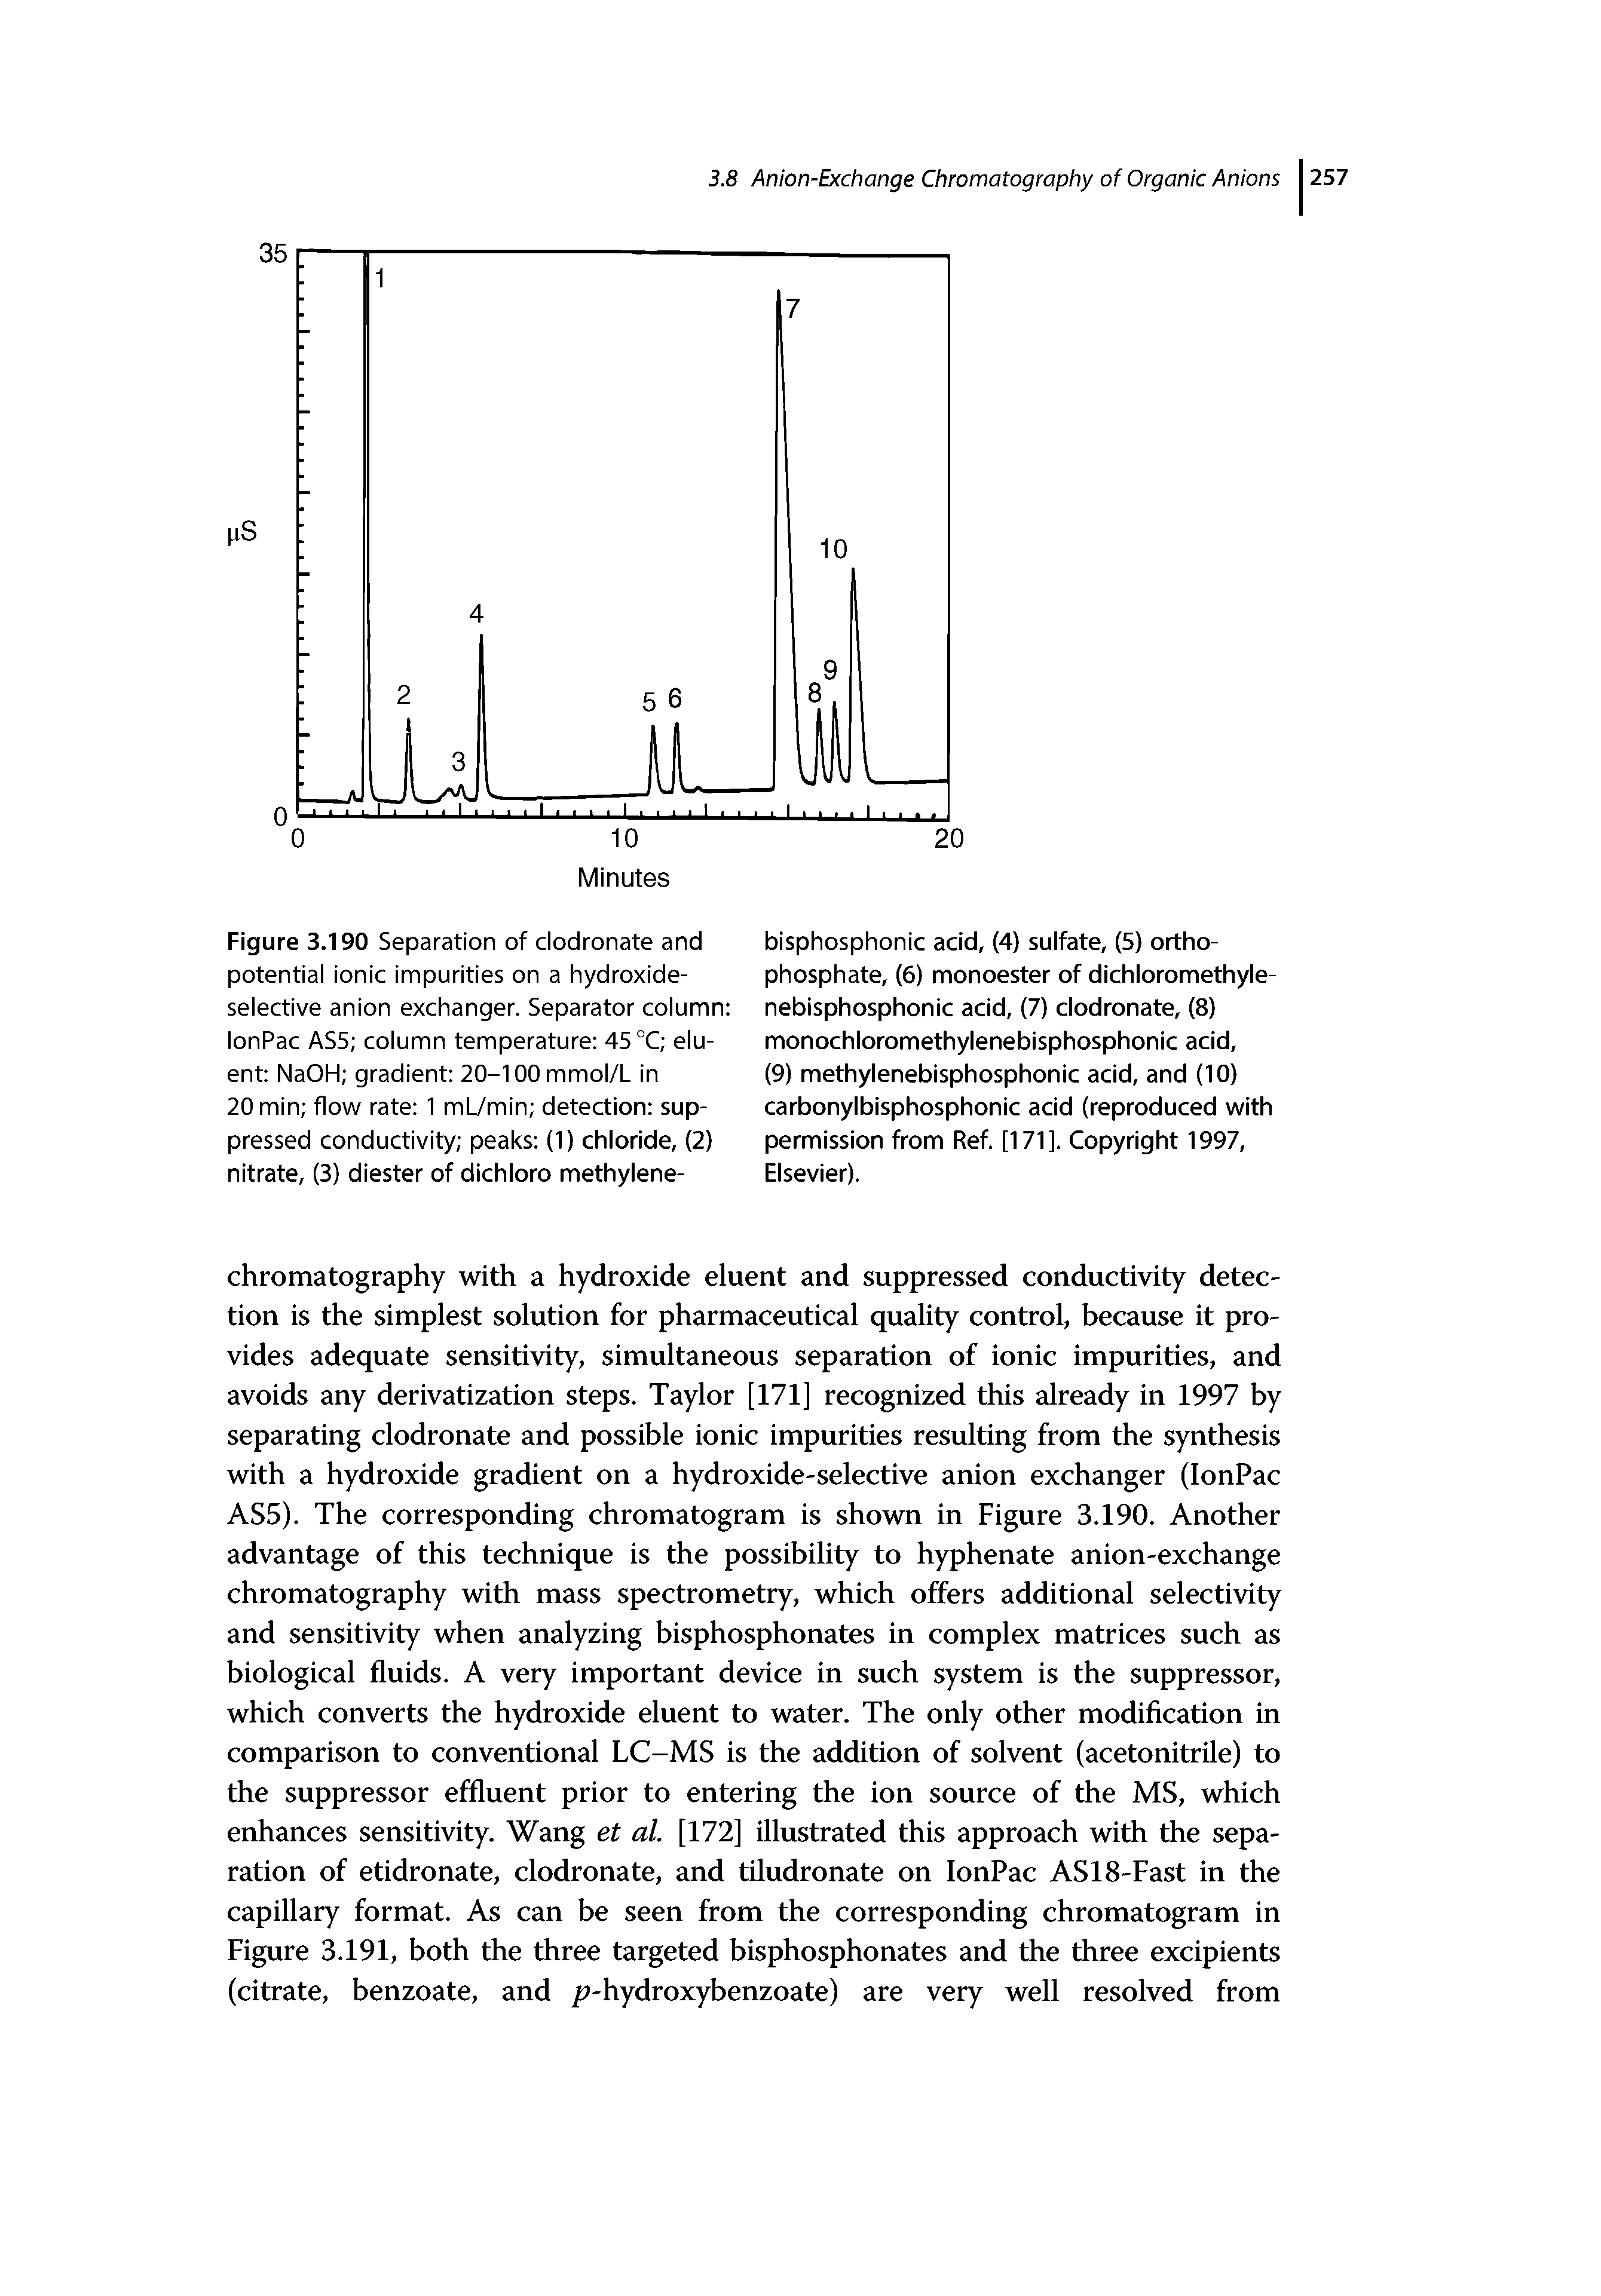 Figure 3.190 Separation of clodronate and potential ionic impurities on a hydroxide-selective anion exchanger. Separator column lonPac ASS column temperature 45 °C eluent NaOH gradient 20-100mmol/L in 20 min flow rate 1 mUmin detection suppressed conductivity peaks (1) chloride, (2) nitrate, (3) diester of dichloro methylene-...